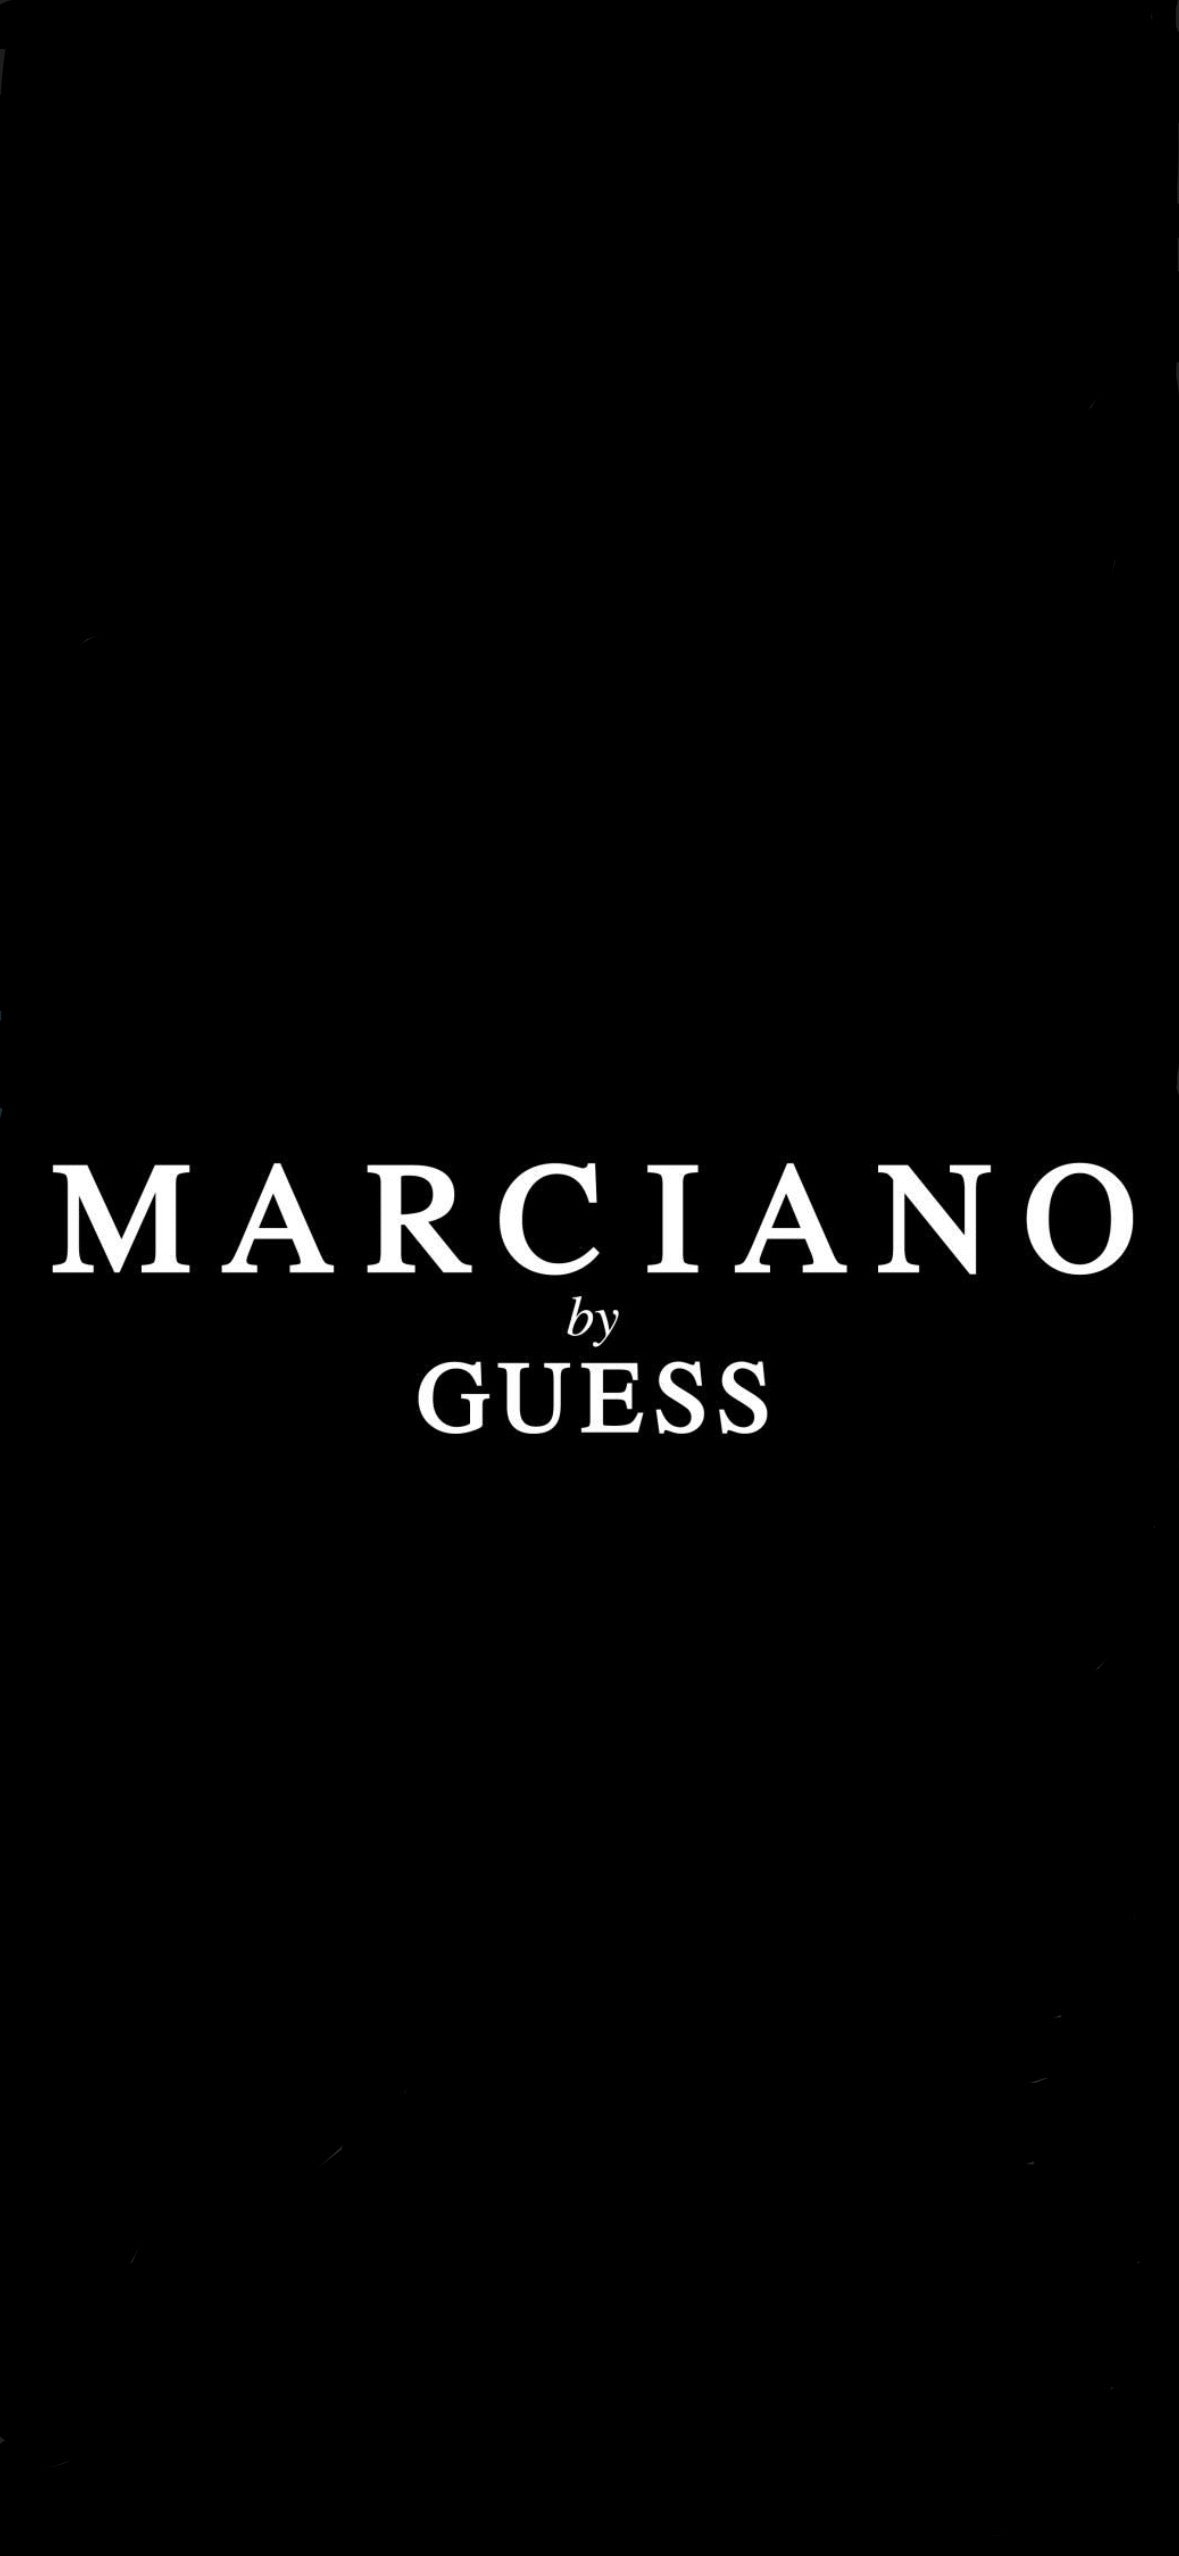 MARCIANO by GUESS